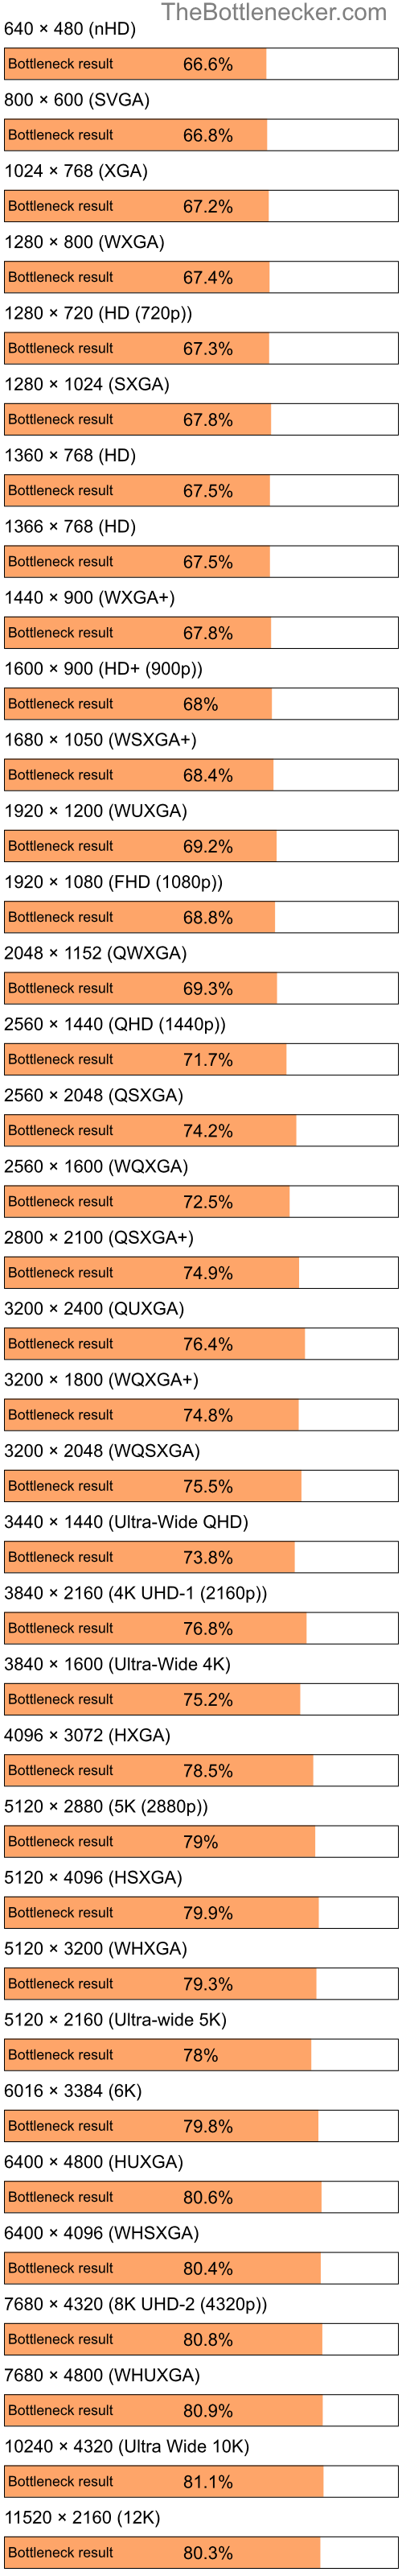 Bottleneck results by resolution for Intel Pentium 4 and AMD Mobility Radeon HD 3430 in Graphic Card Intense Tasks